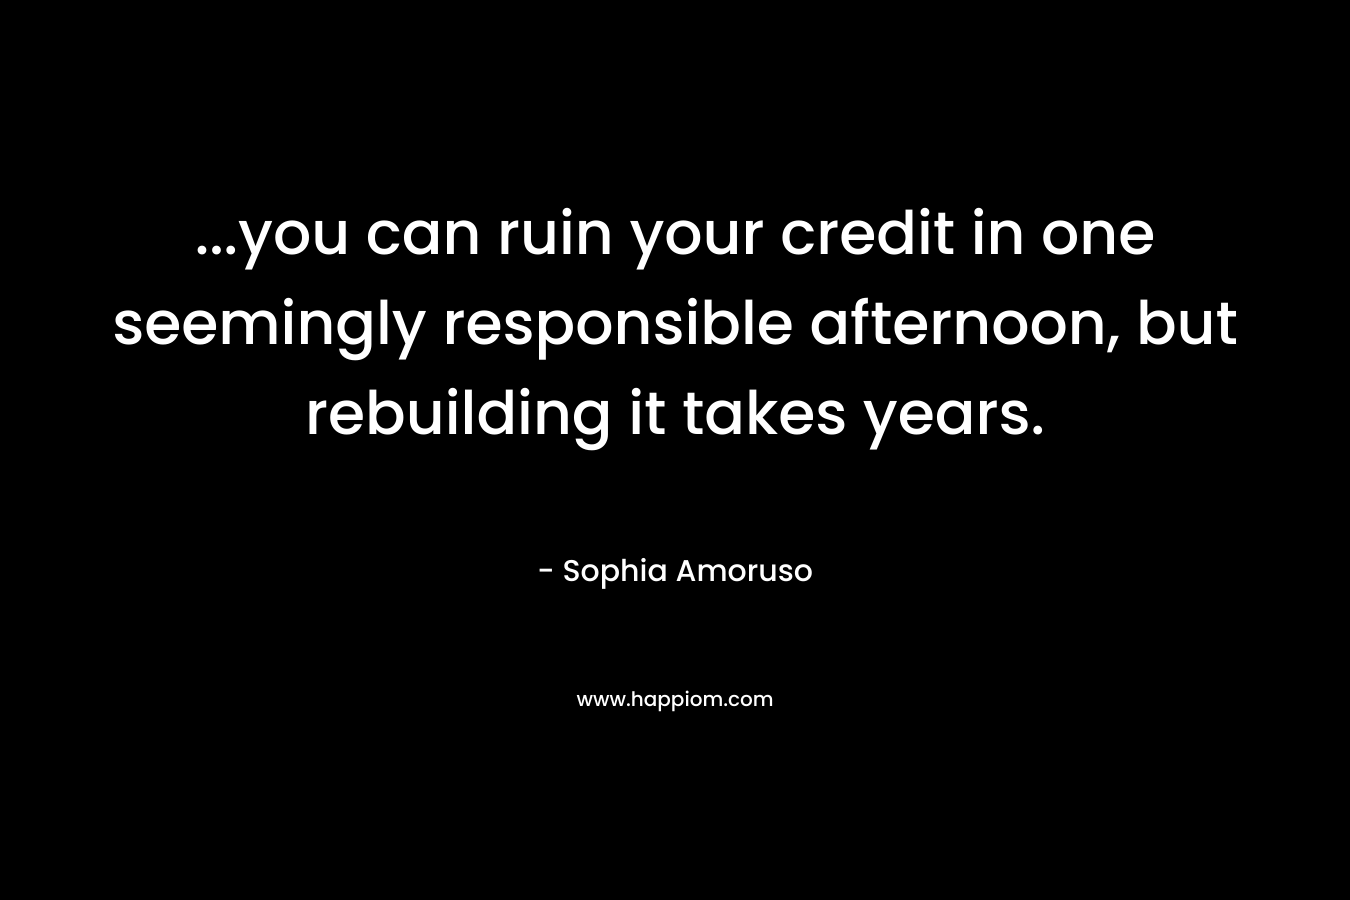 …you can ruin your credit in one seemingly responsible afternoon, but rebuilding it takes years. – Sophia Amoruso